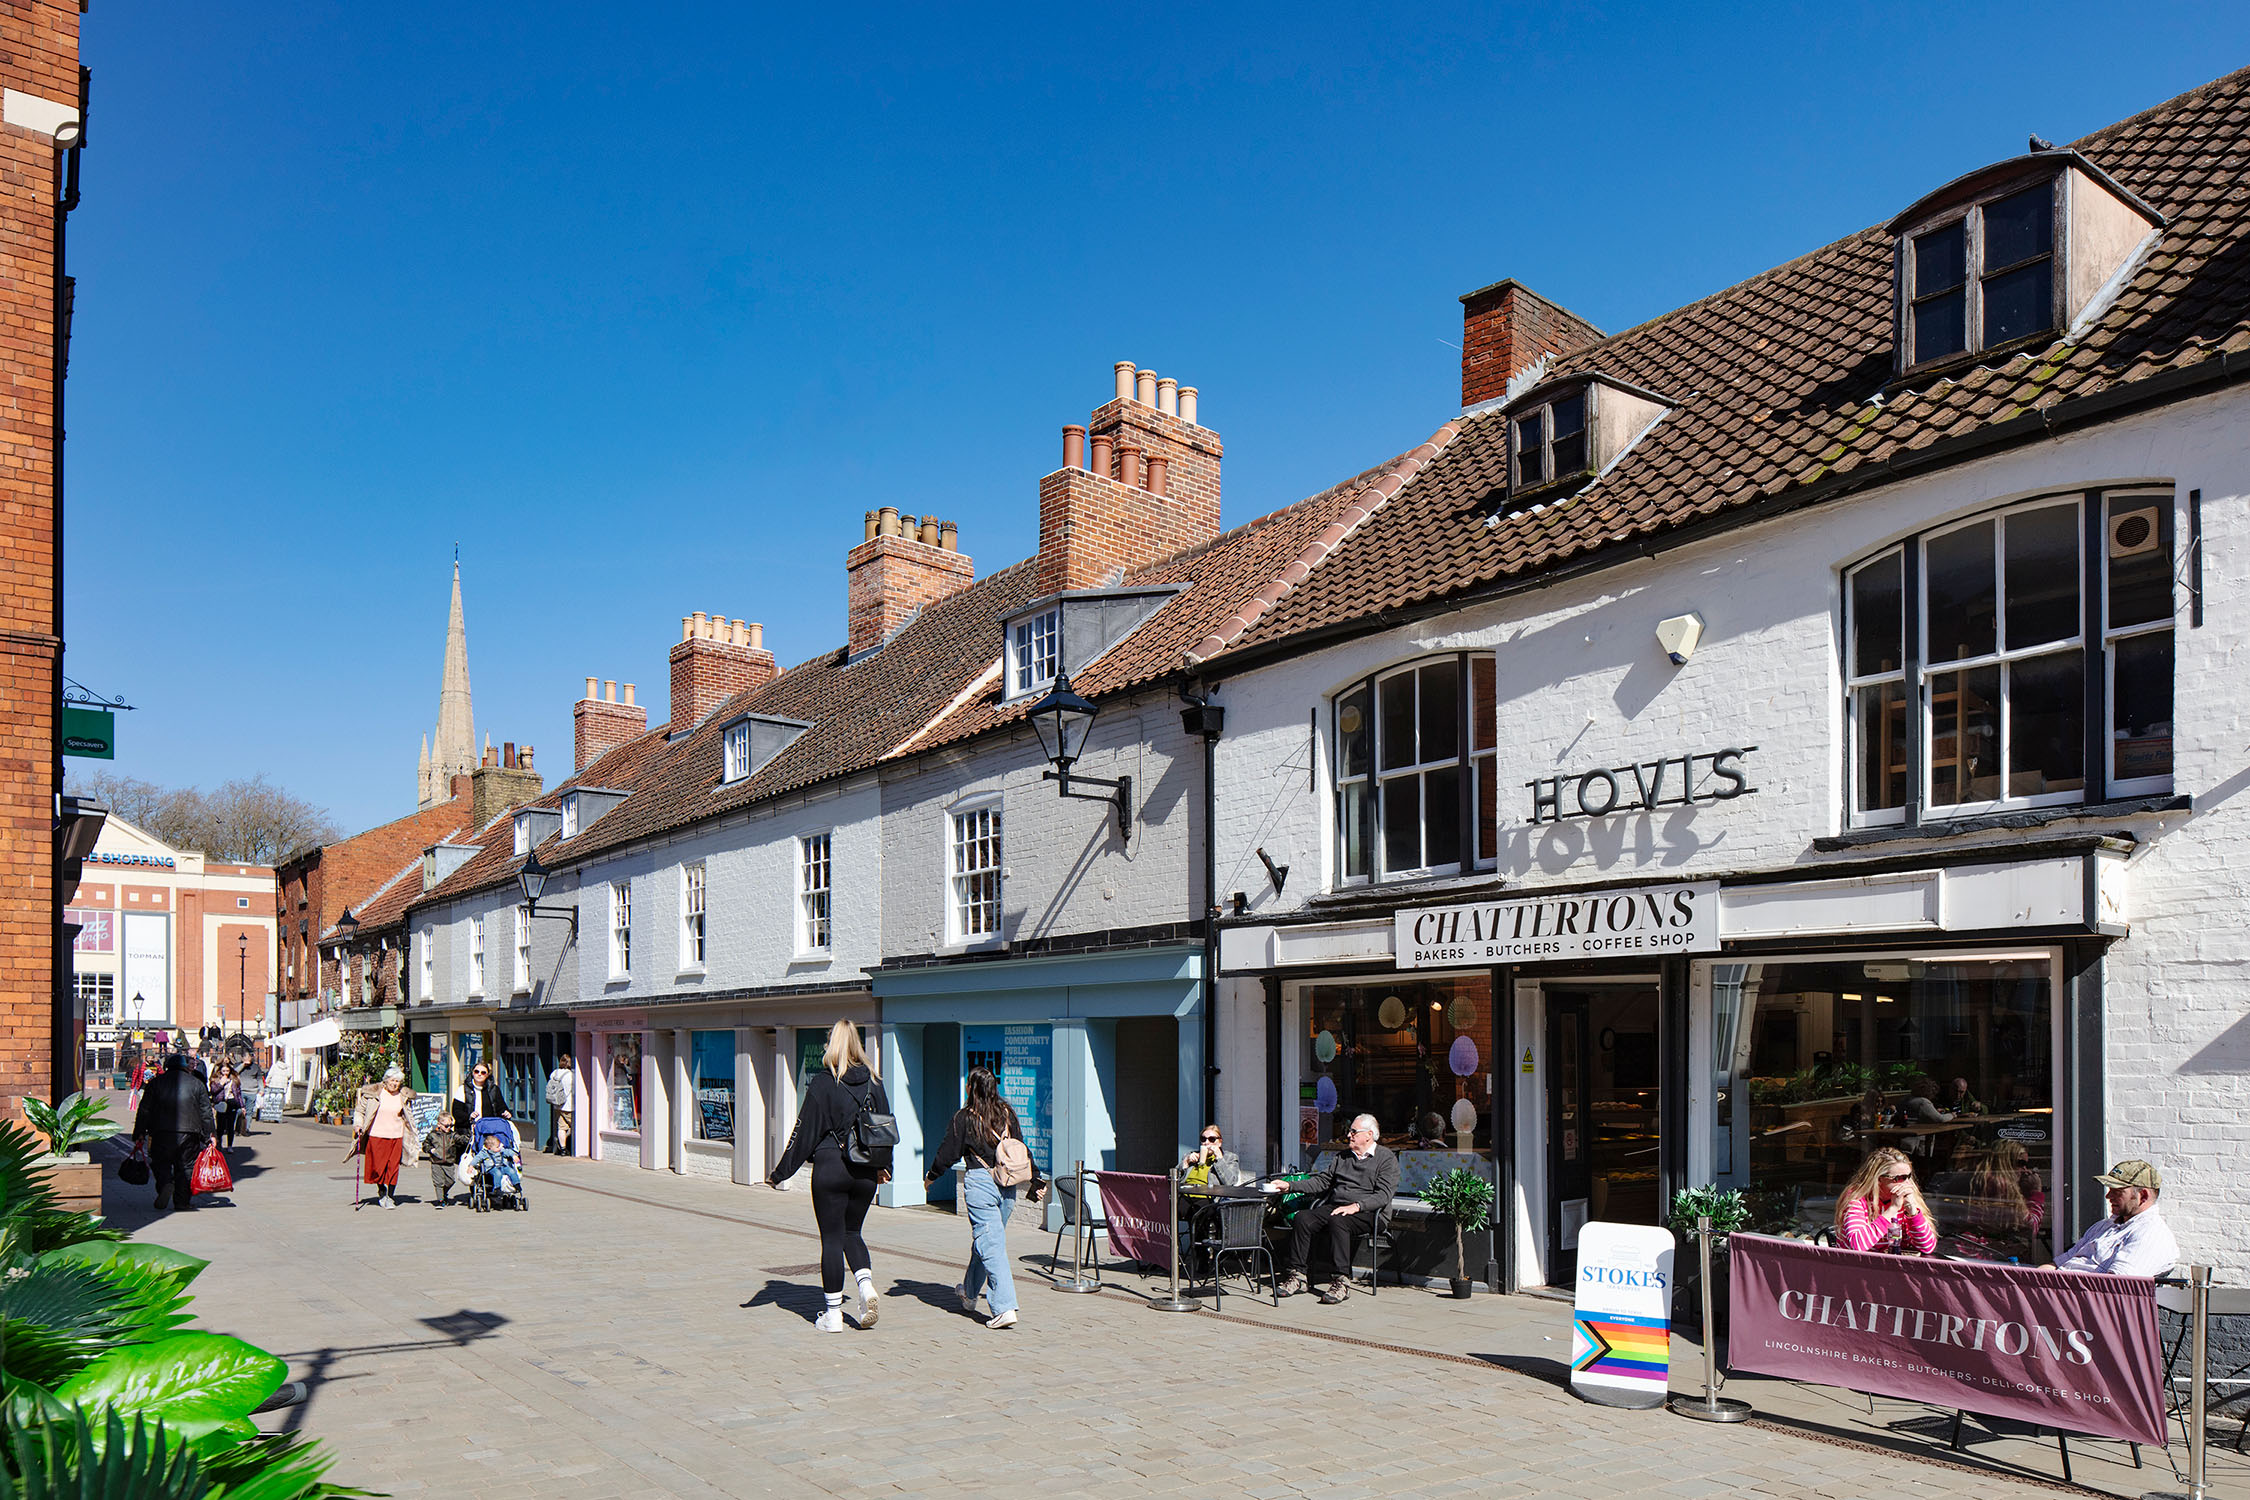 An urban street scene of shops and people on a high street in Lincoln, UK. Signs on the coffee shop in the foreground read 'Hovis / Chattertons'.